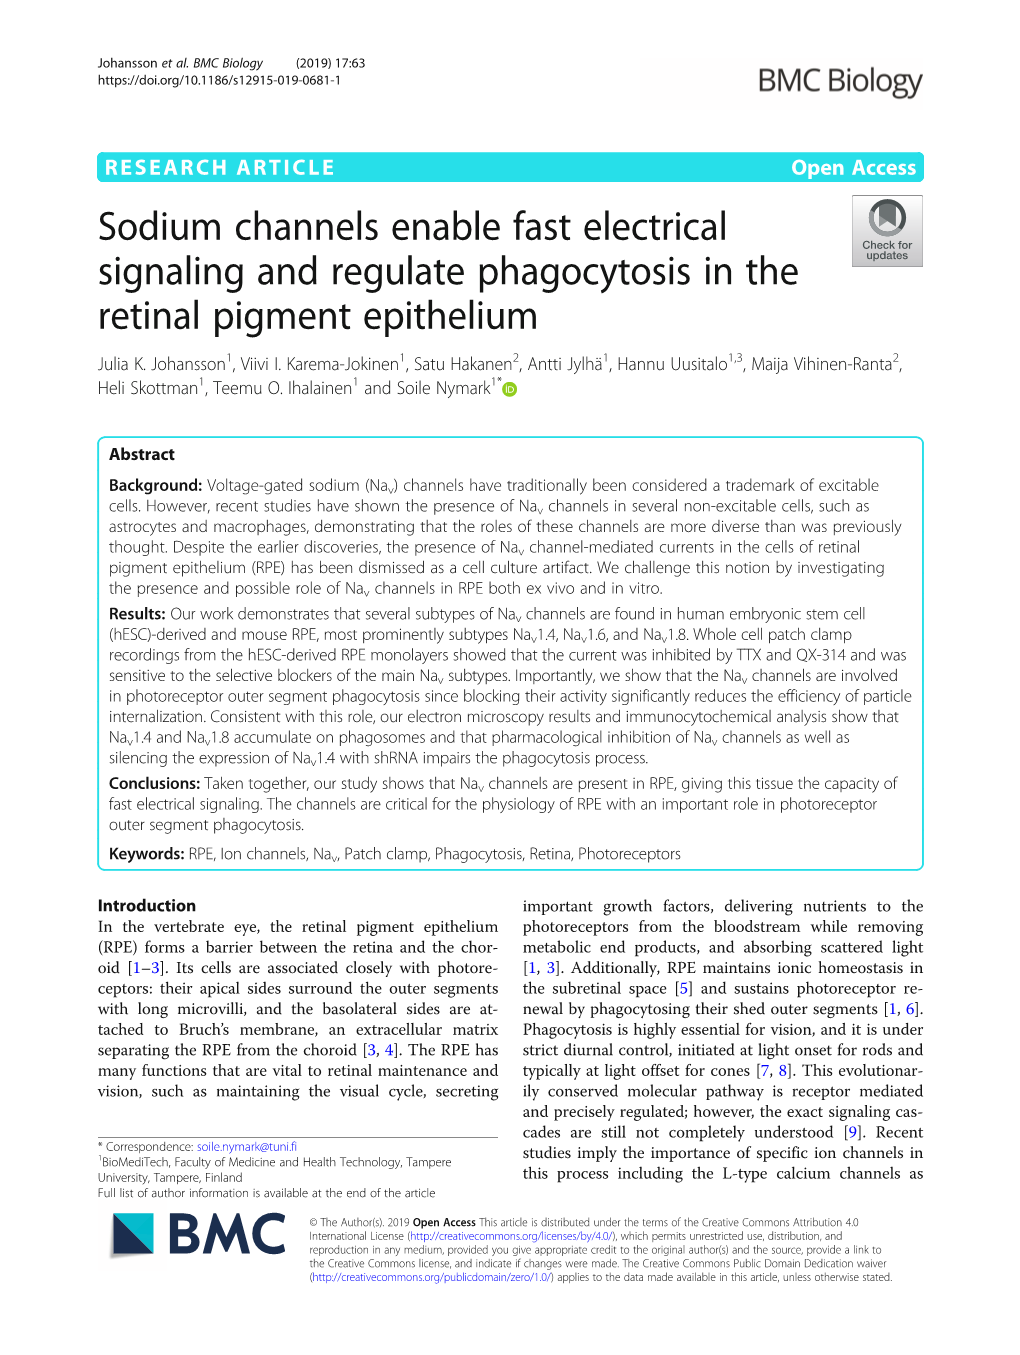 Sodium Channels Enable Fast Electrical Signaling and Regulate Phagocytosis in the Retinal Pigment Epithelium Julia K